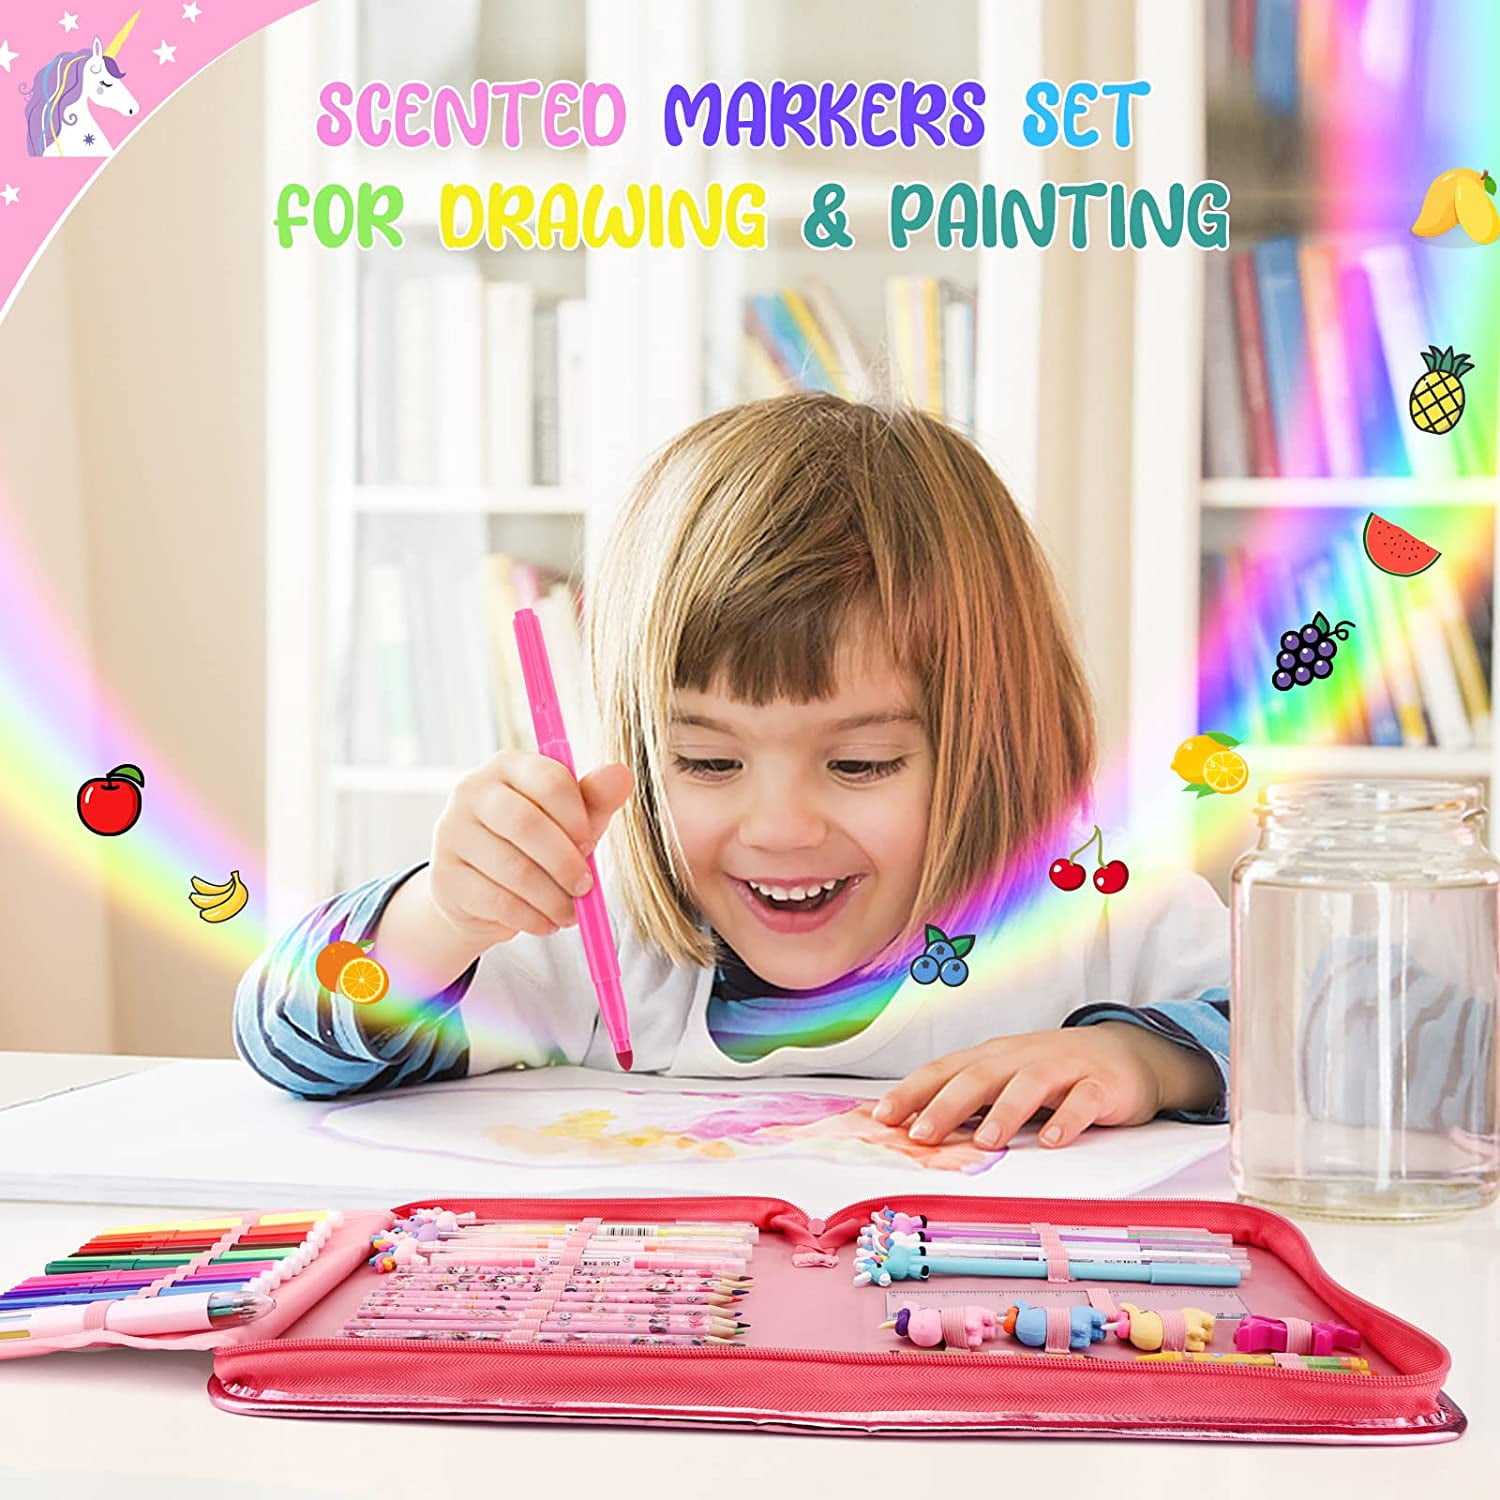 Fruit Scented Markers Set 56 Pcs with Glitter Mermaid Pencil Case